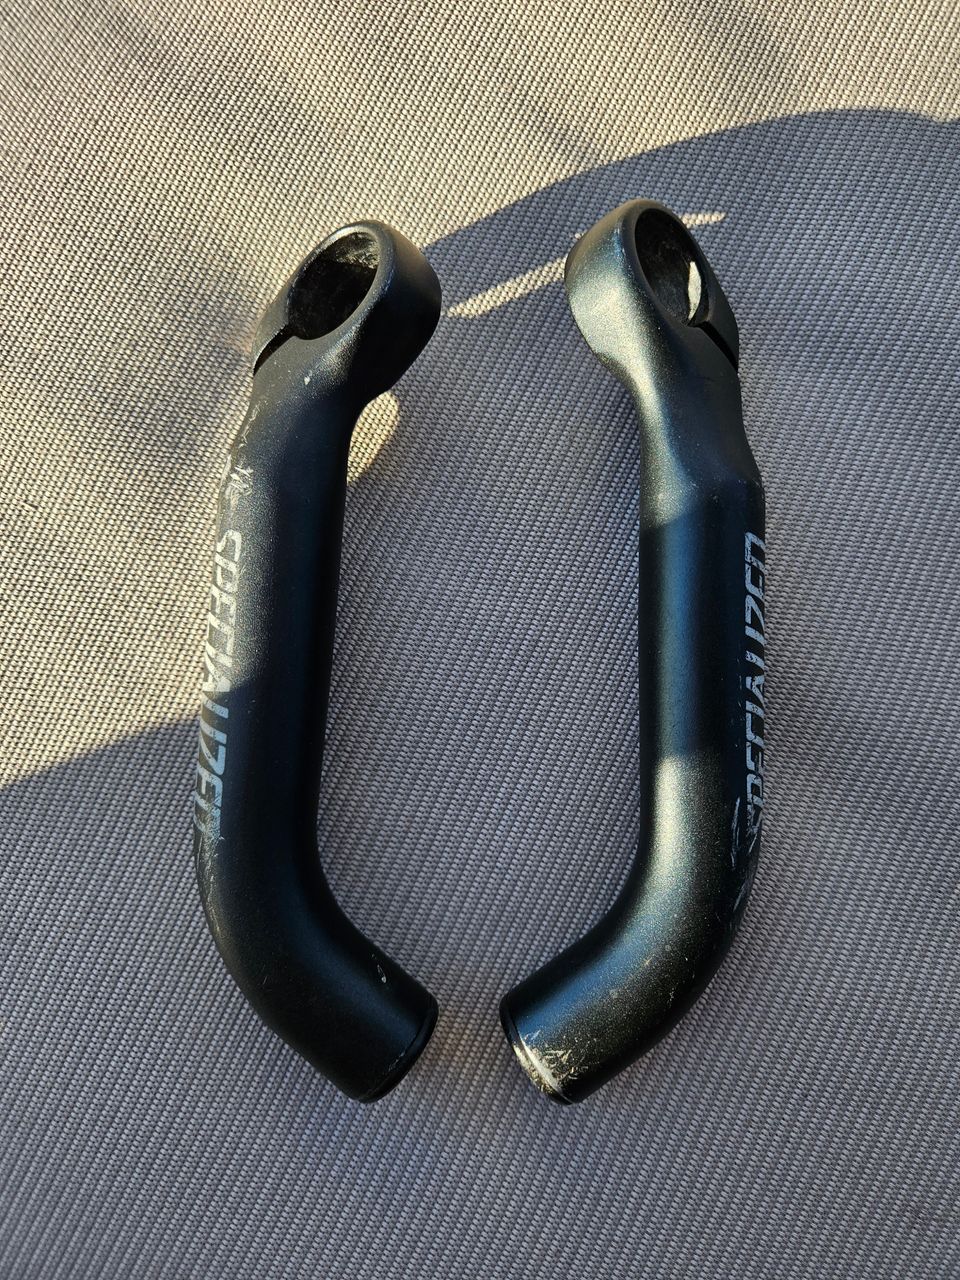 Specialized bar ends